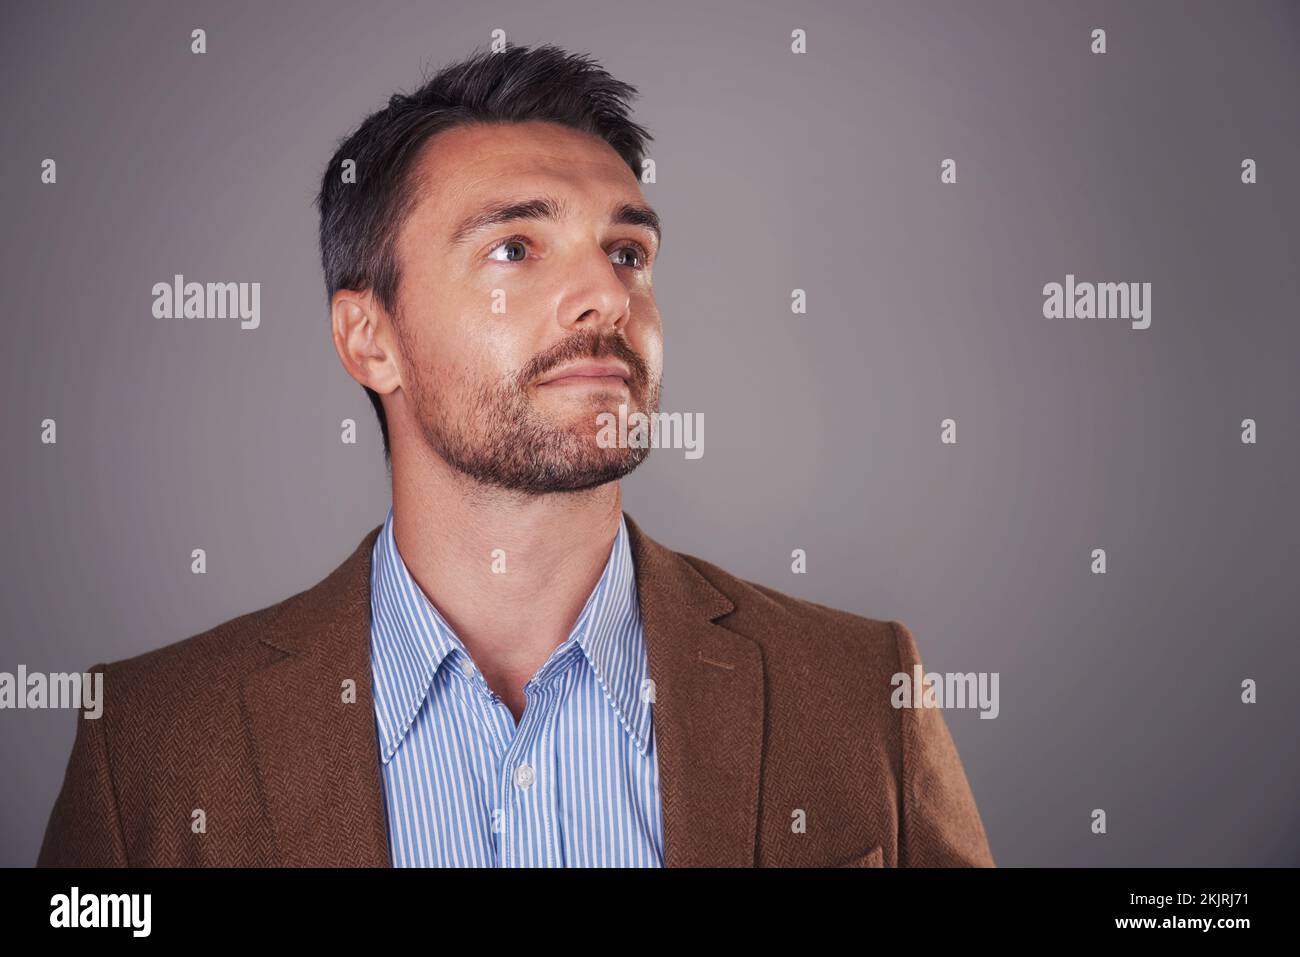 Looking ahead. Studio shot of a man deep in thought against a gray background. Stock Photo